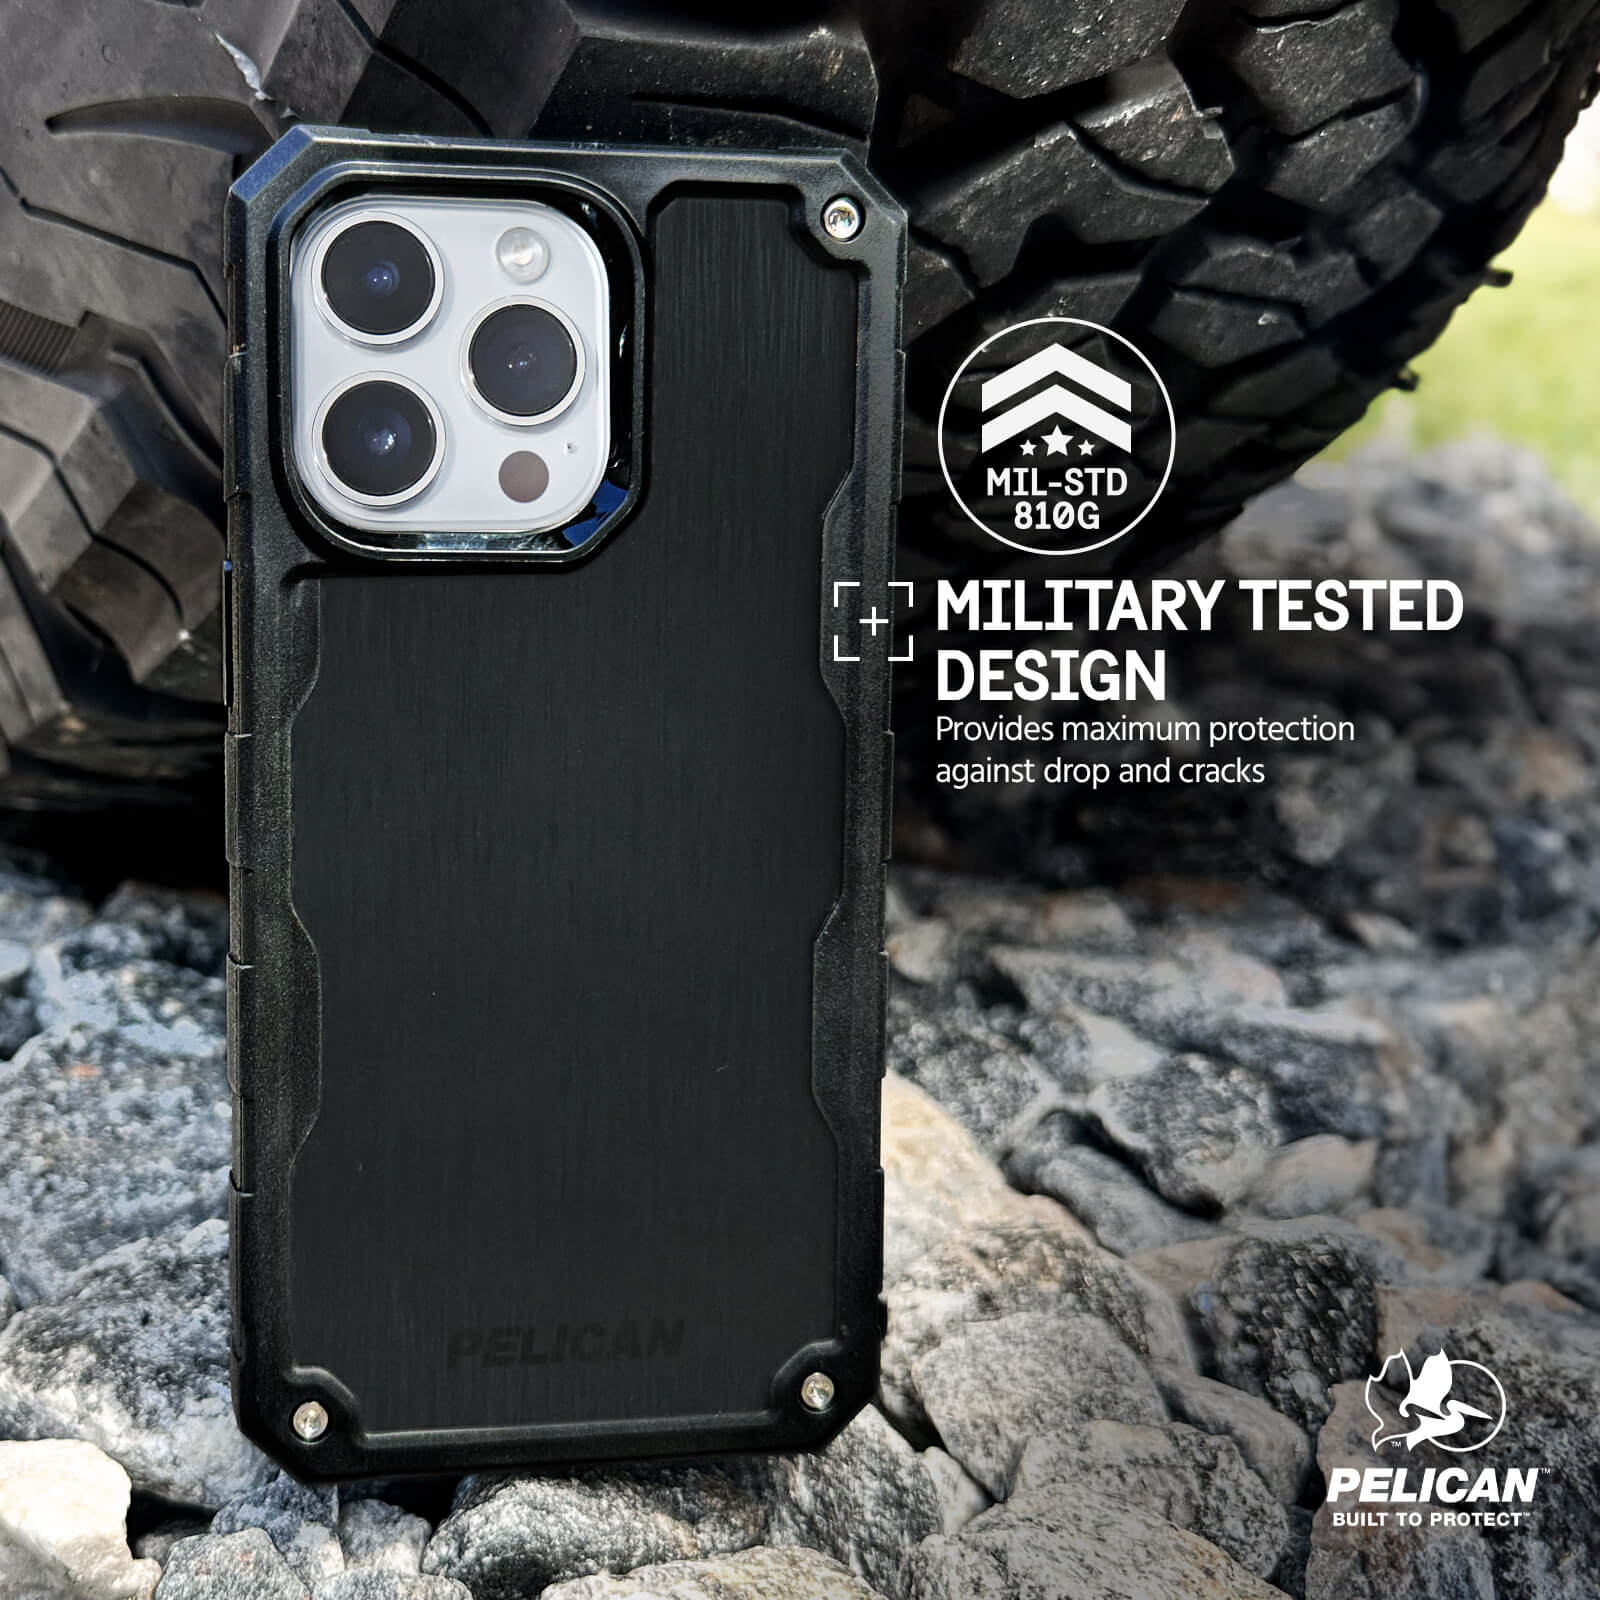 MILITARY TESTED DESIGN. PROVIDES MAXIMUM PROTECTION AGAINST DROP AND CRACKS.